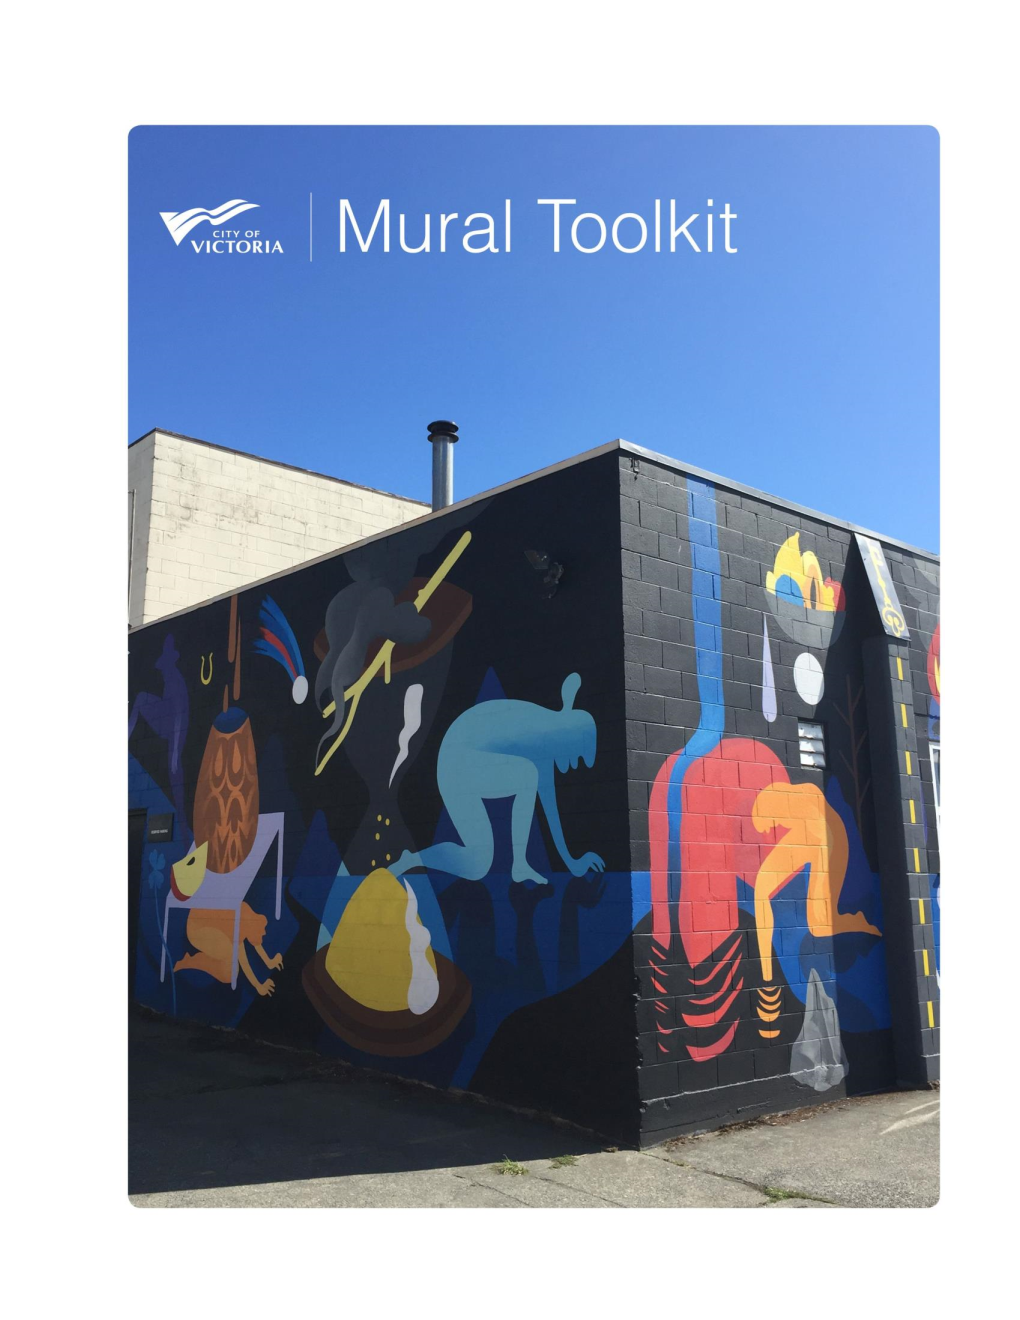 Mural Toolkit, a Key Deliverable of the Create Victoria Arts and Culture Master Plan